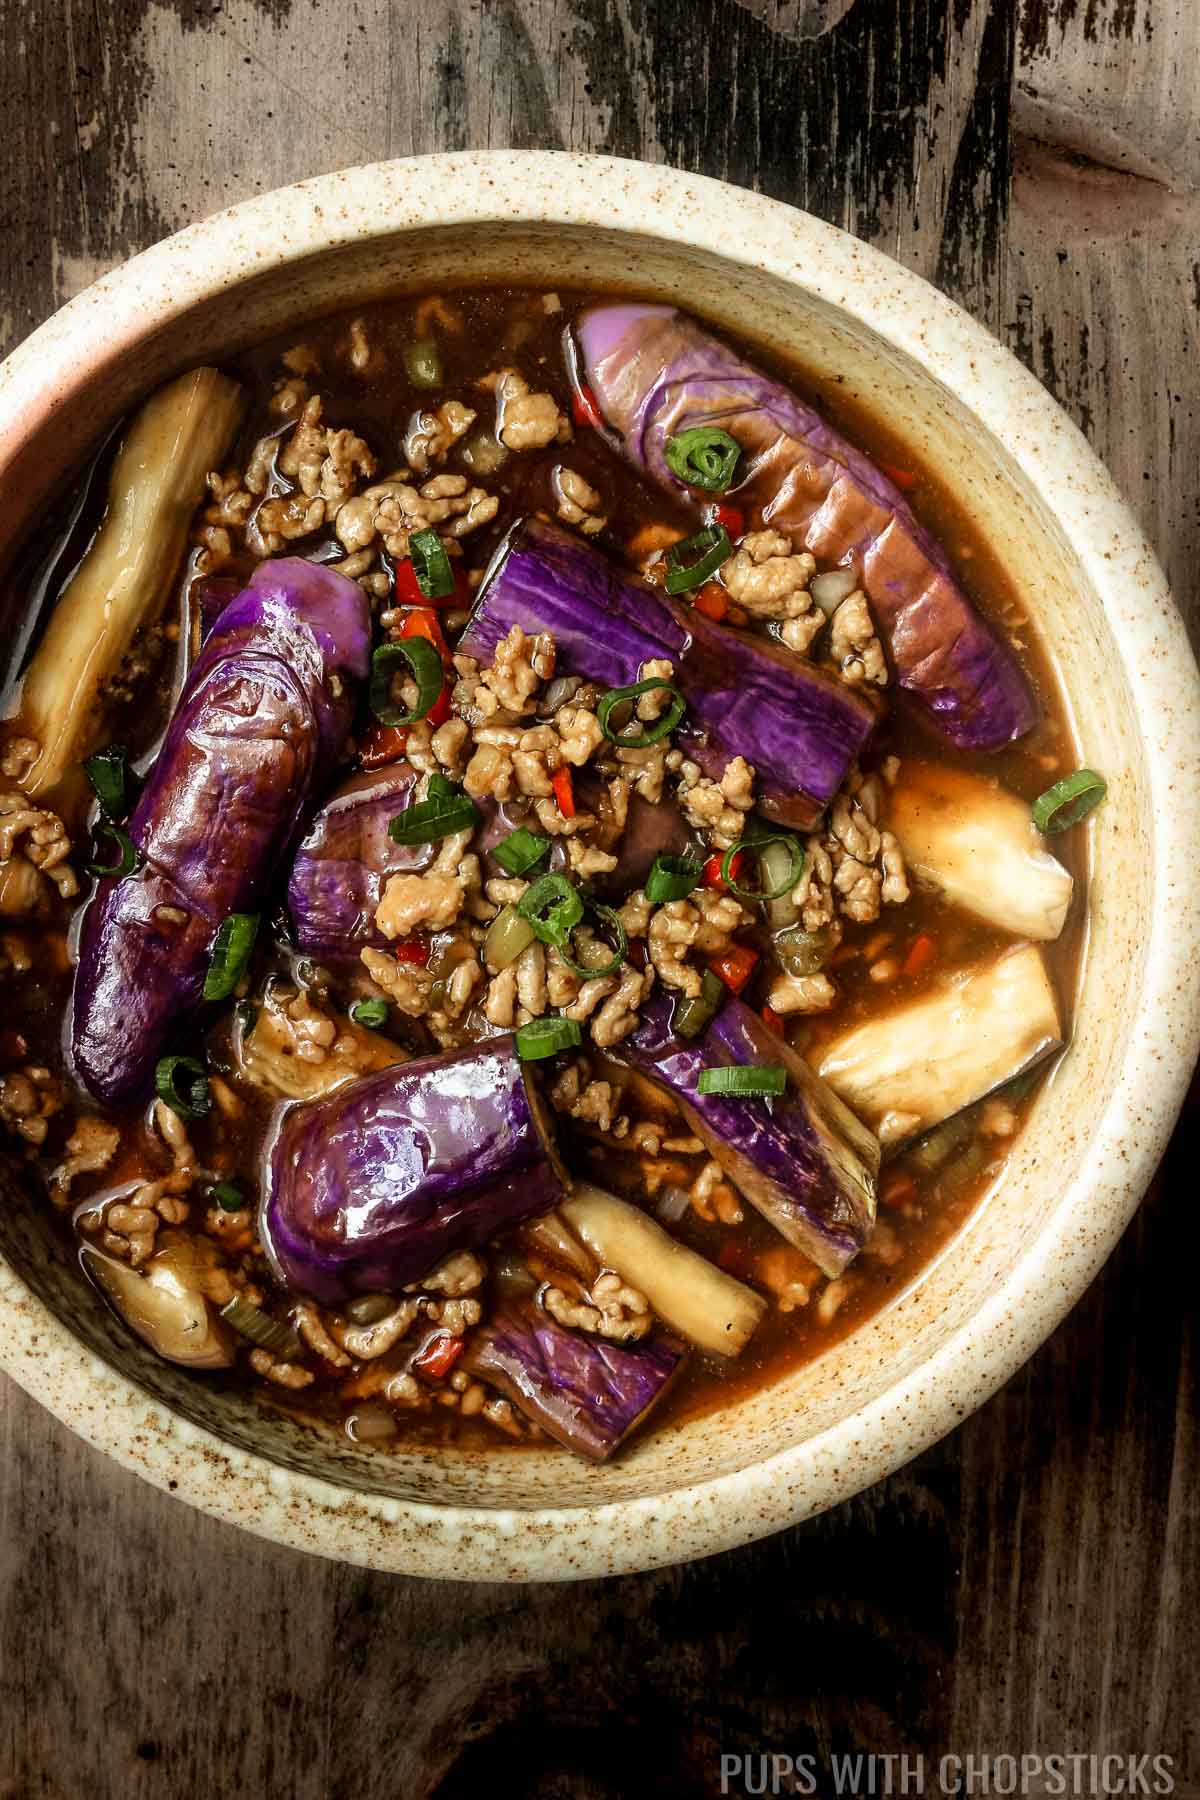 Overhead closeup picture of Chinese eggplant with garlic sauce in a large bowl